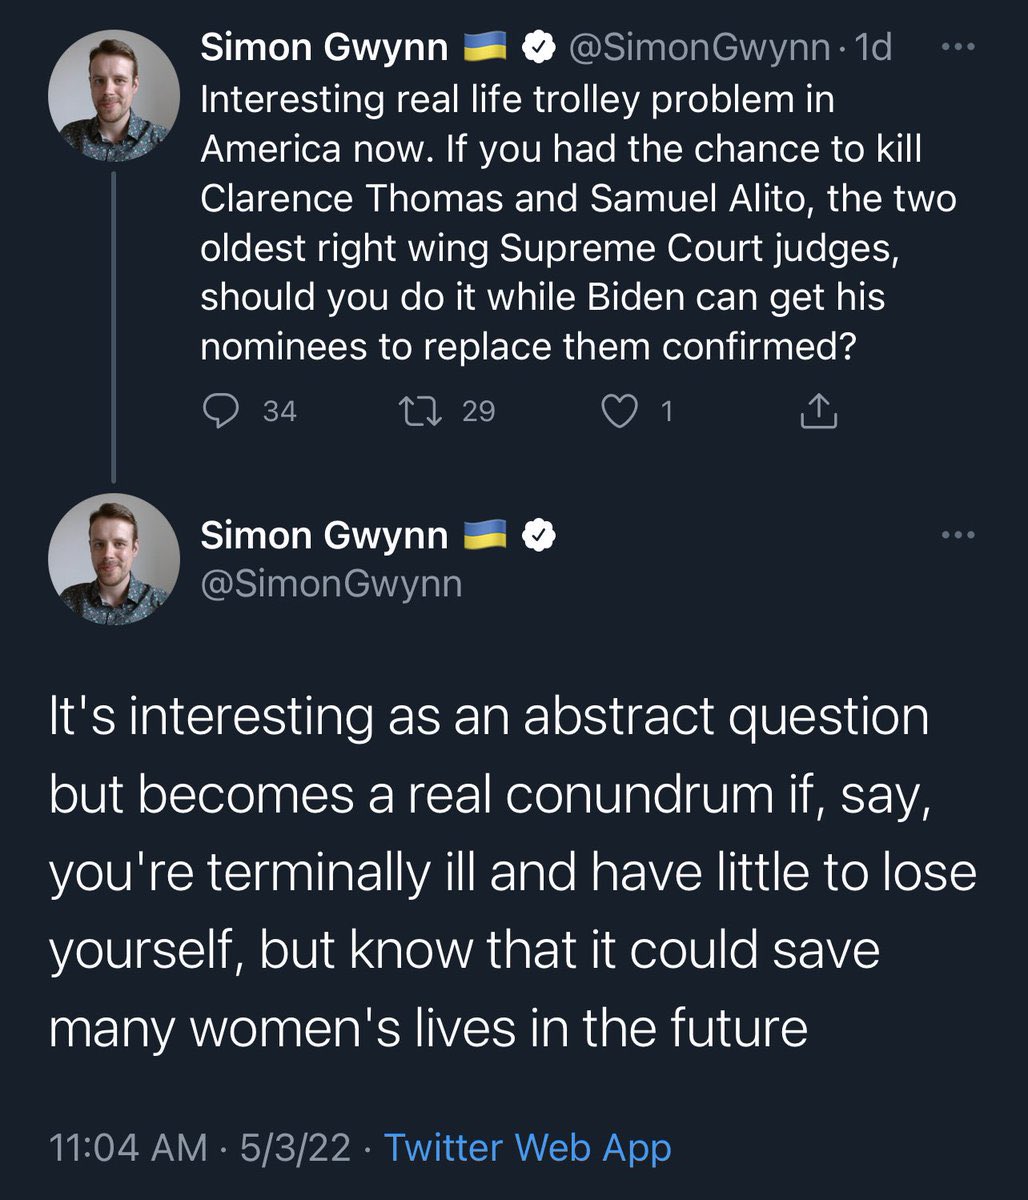 @SimonGwynn Oh hey 👋 I made sure to screenshot the tweets where u are calling for the assassination of 2 SC justices😬 Hey @FBI @ALT_DOJ you going to do anything abt this